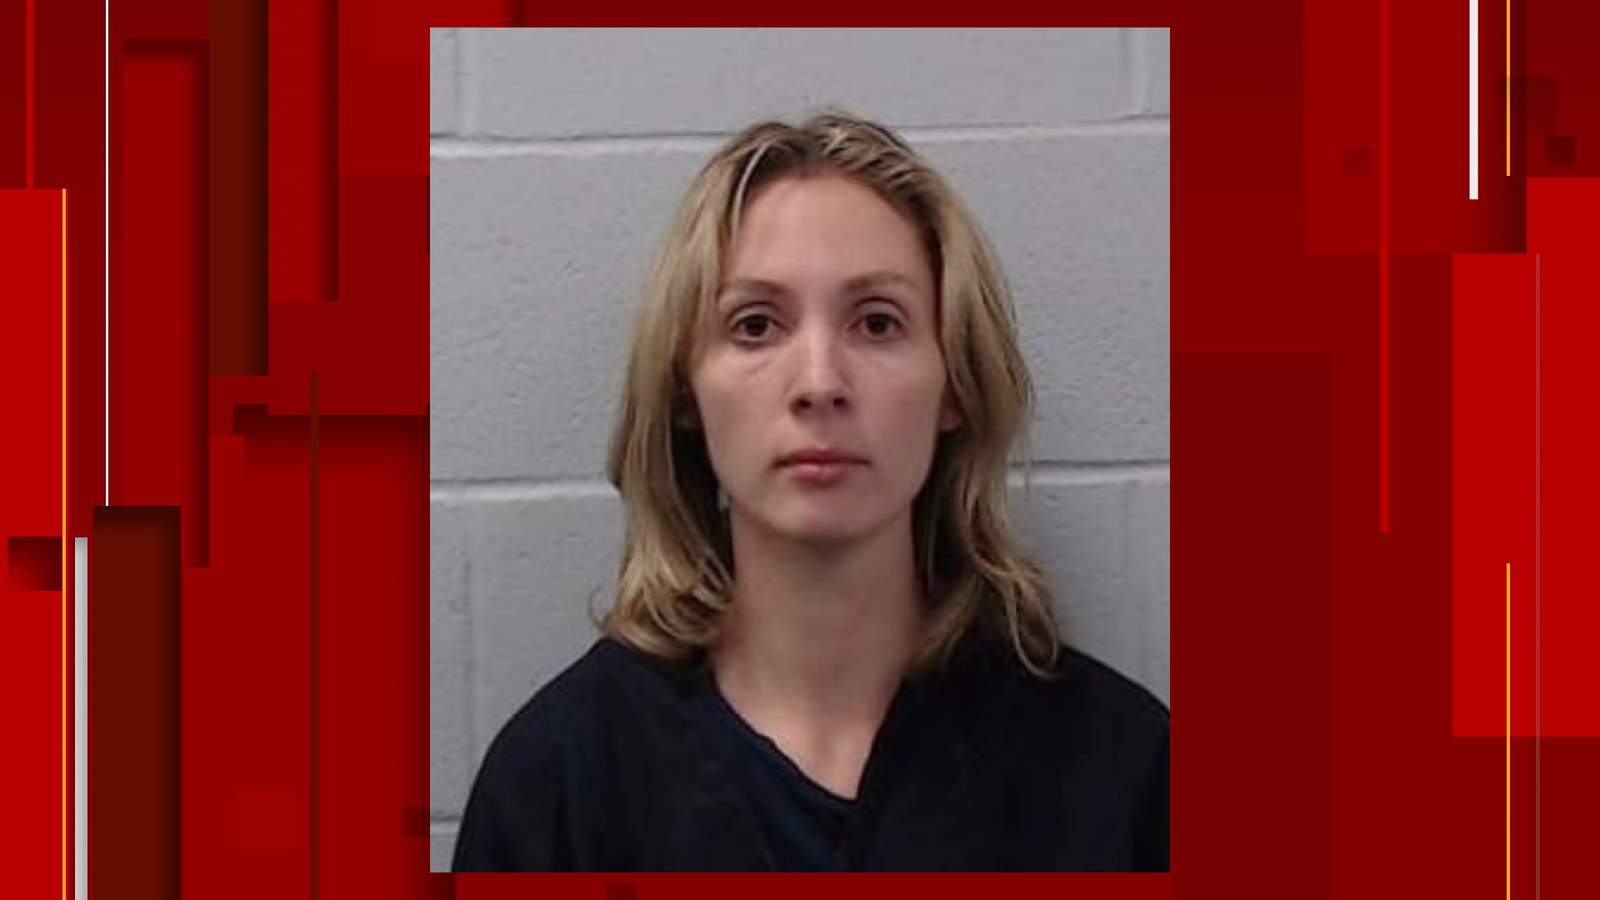 Woman caught ‘red-handed’ after painting graffiti on Dripping Springs City Hall, officials say